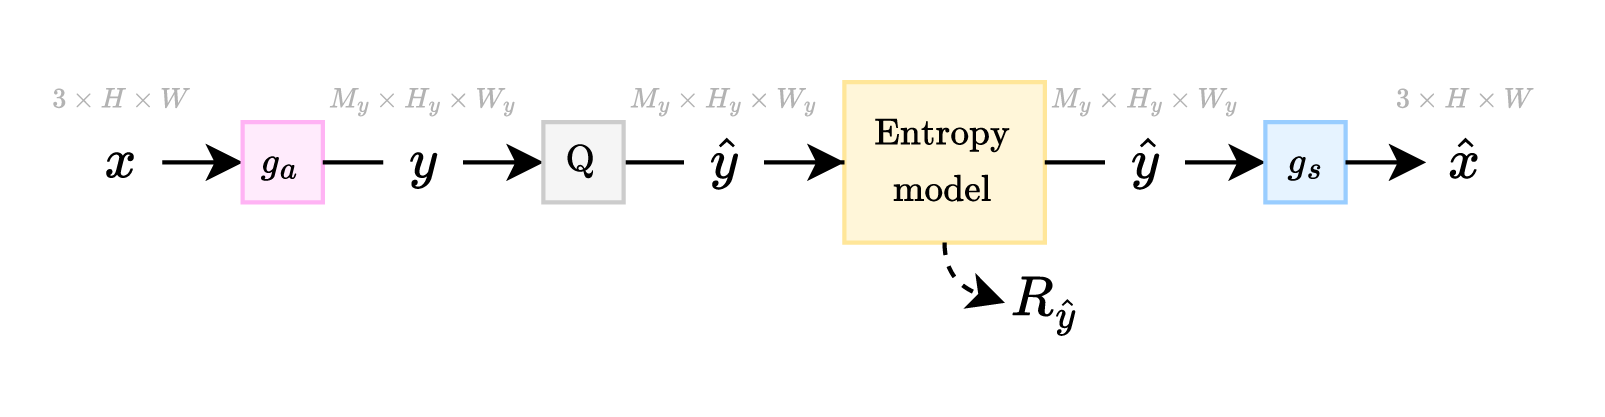 Simple compression architecture. x goes into the transform g_a, resulting in y. y is quantized to y_hat. y_hat is entropy coded to produce a bitstream, which has a rate cost R_y. y_hat is fed into g_s to produce the reconstruction x_hat.